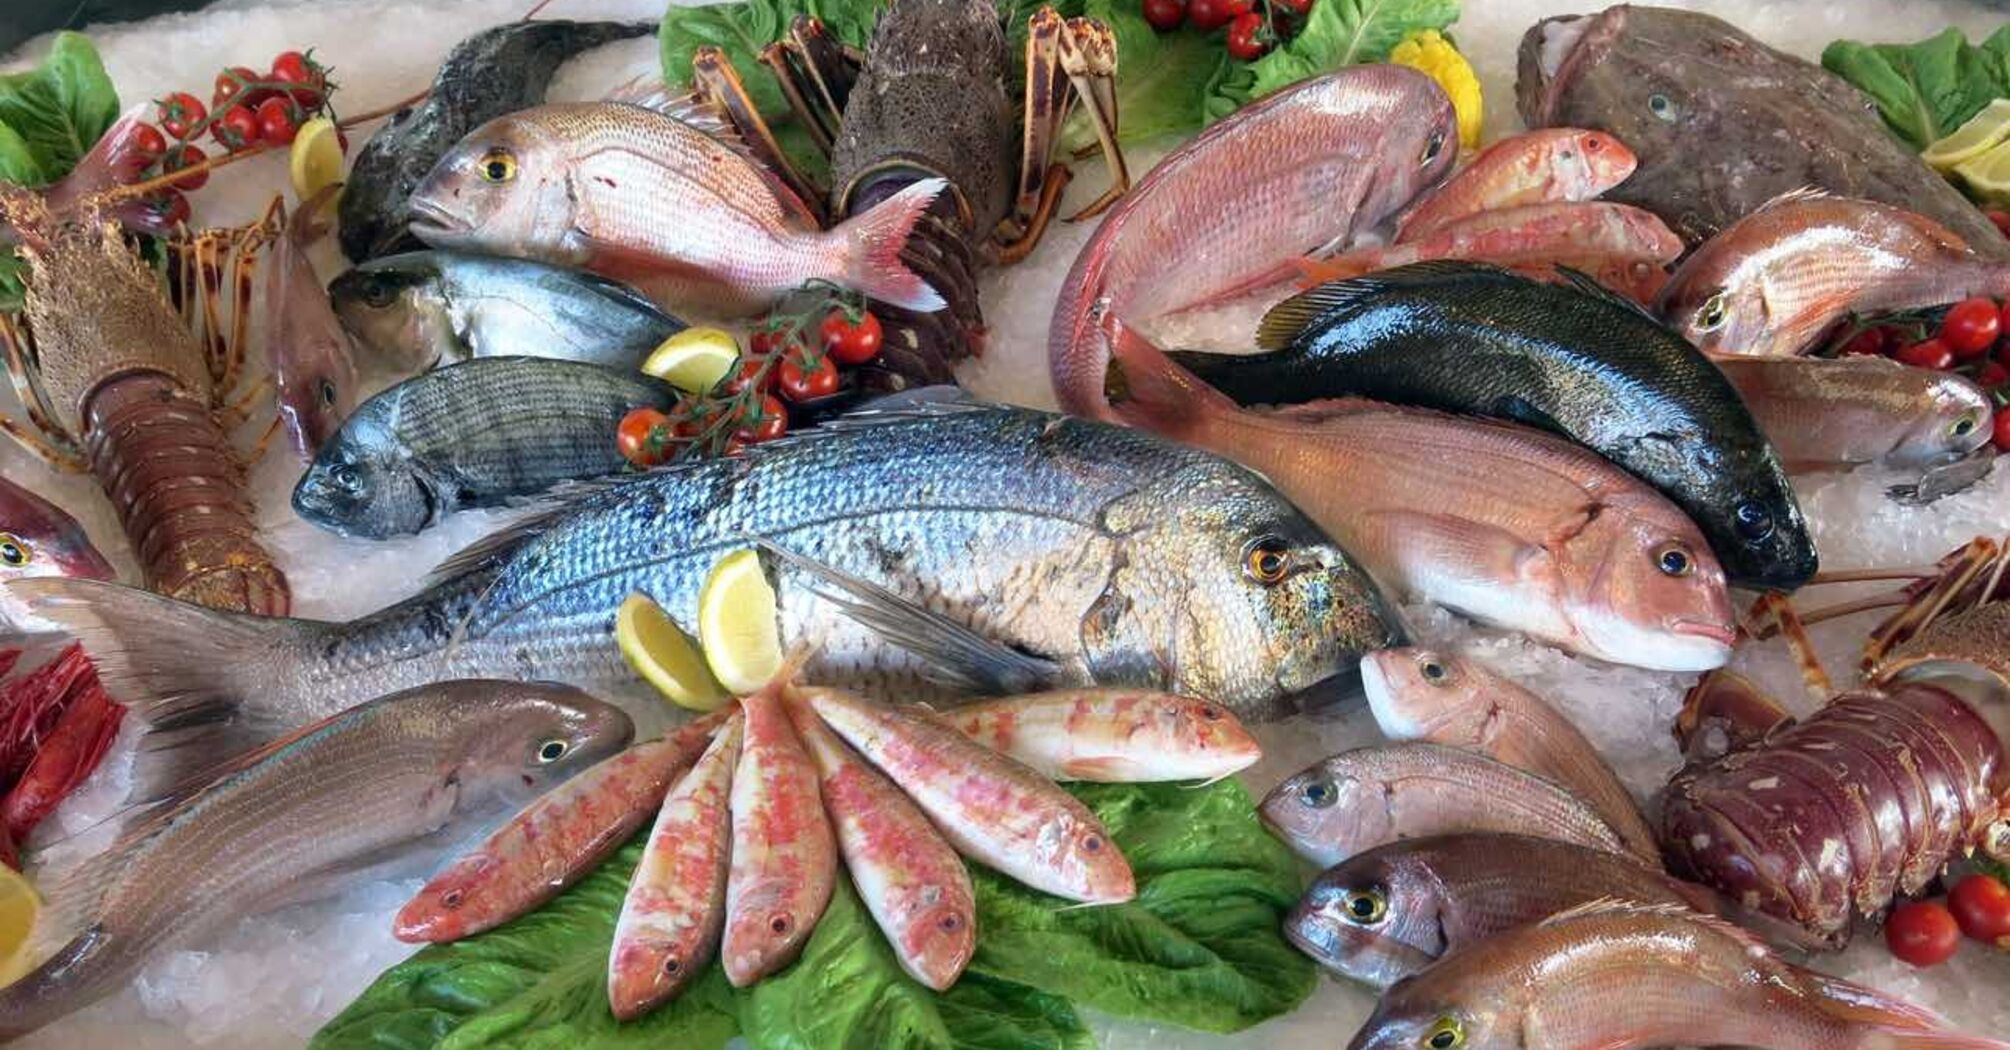 What types of fish are the healthiest